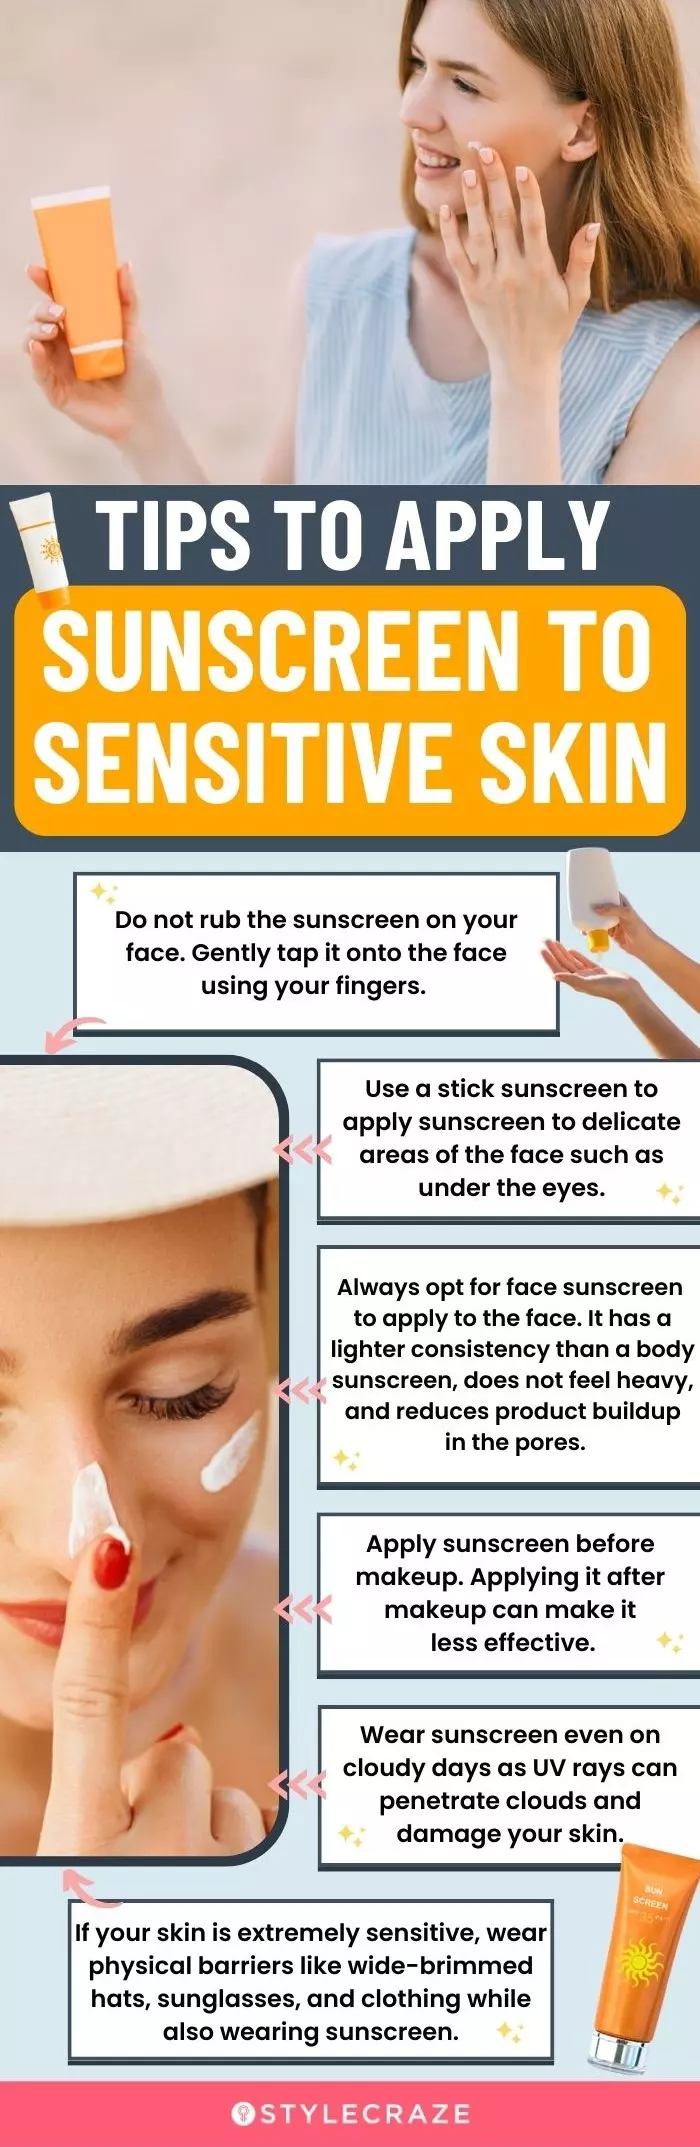  Tips To Apply Sunscreen To Sensitive Skin (infographic)